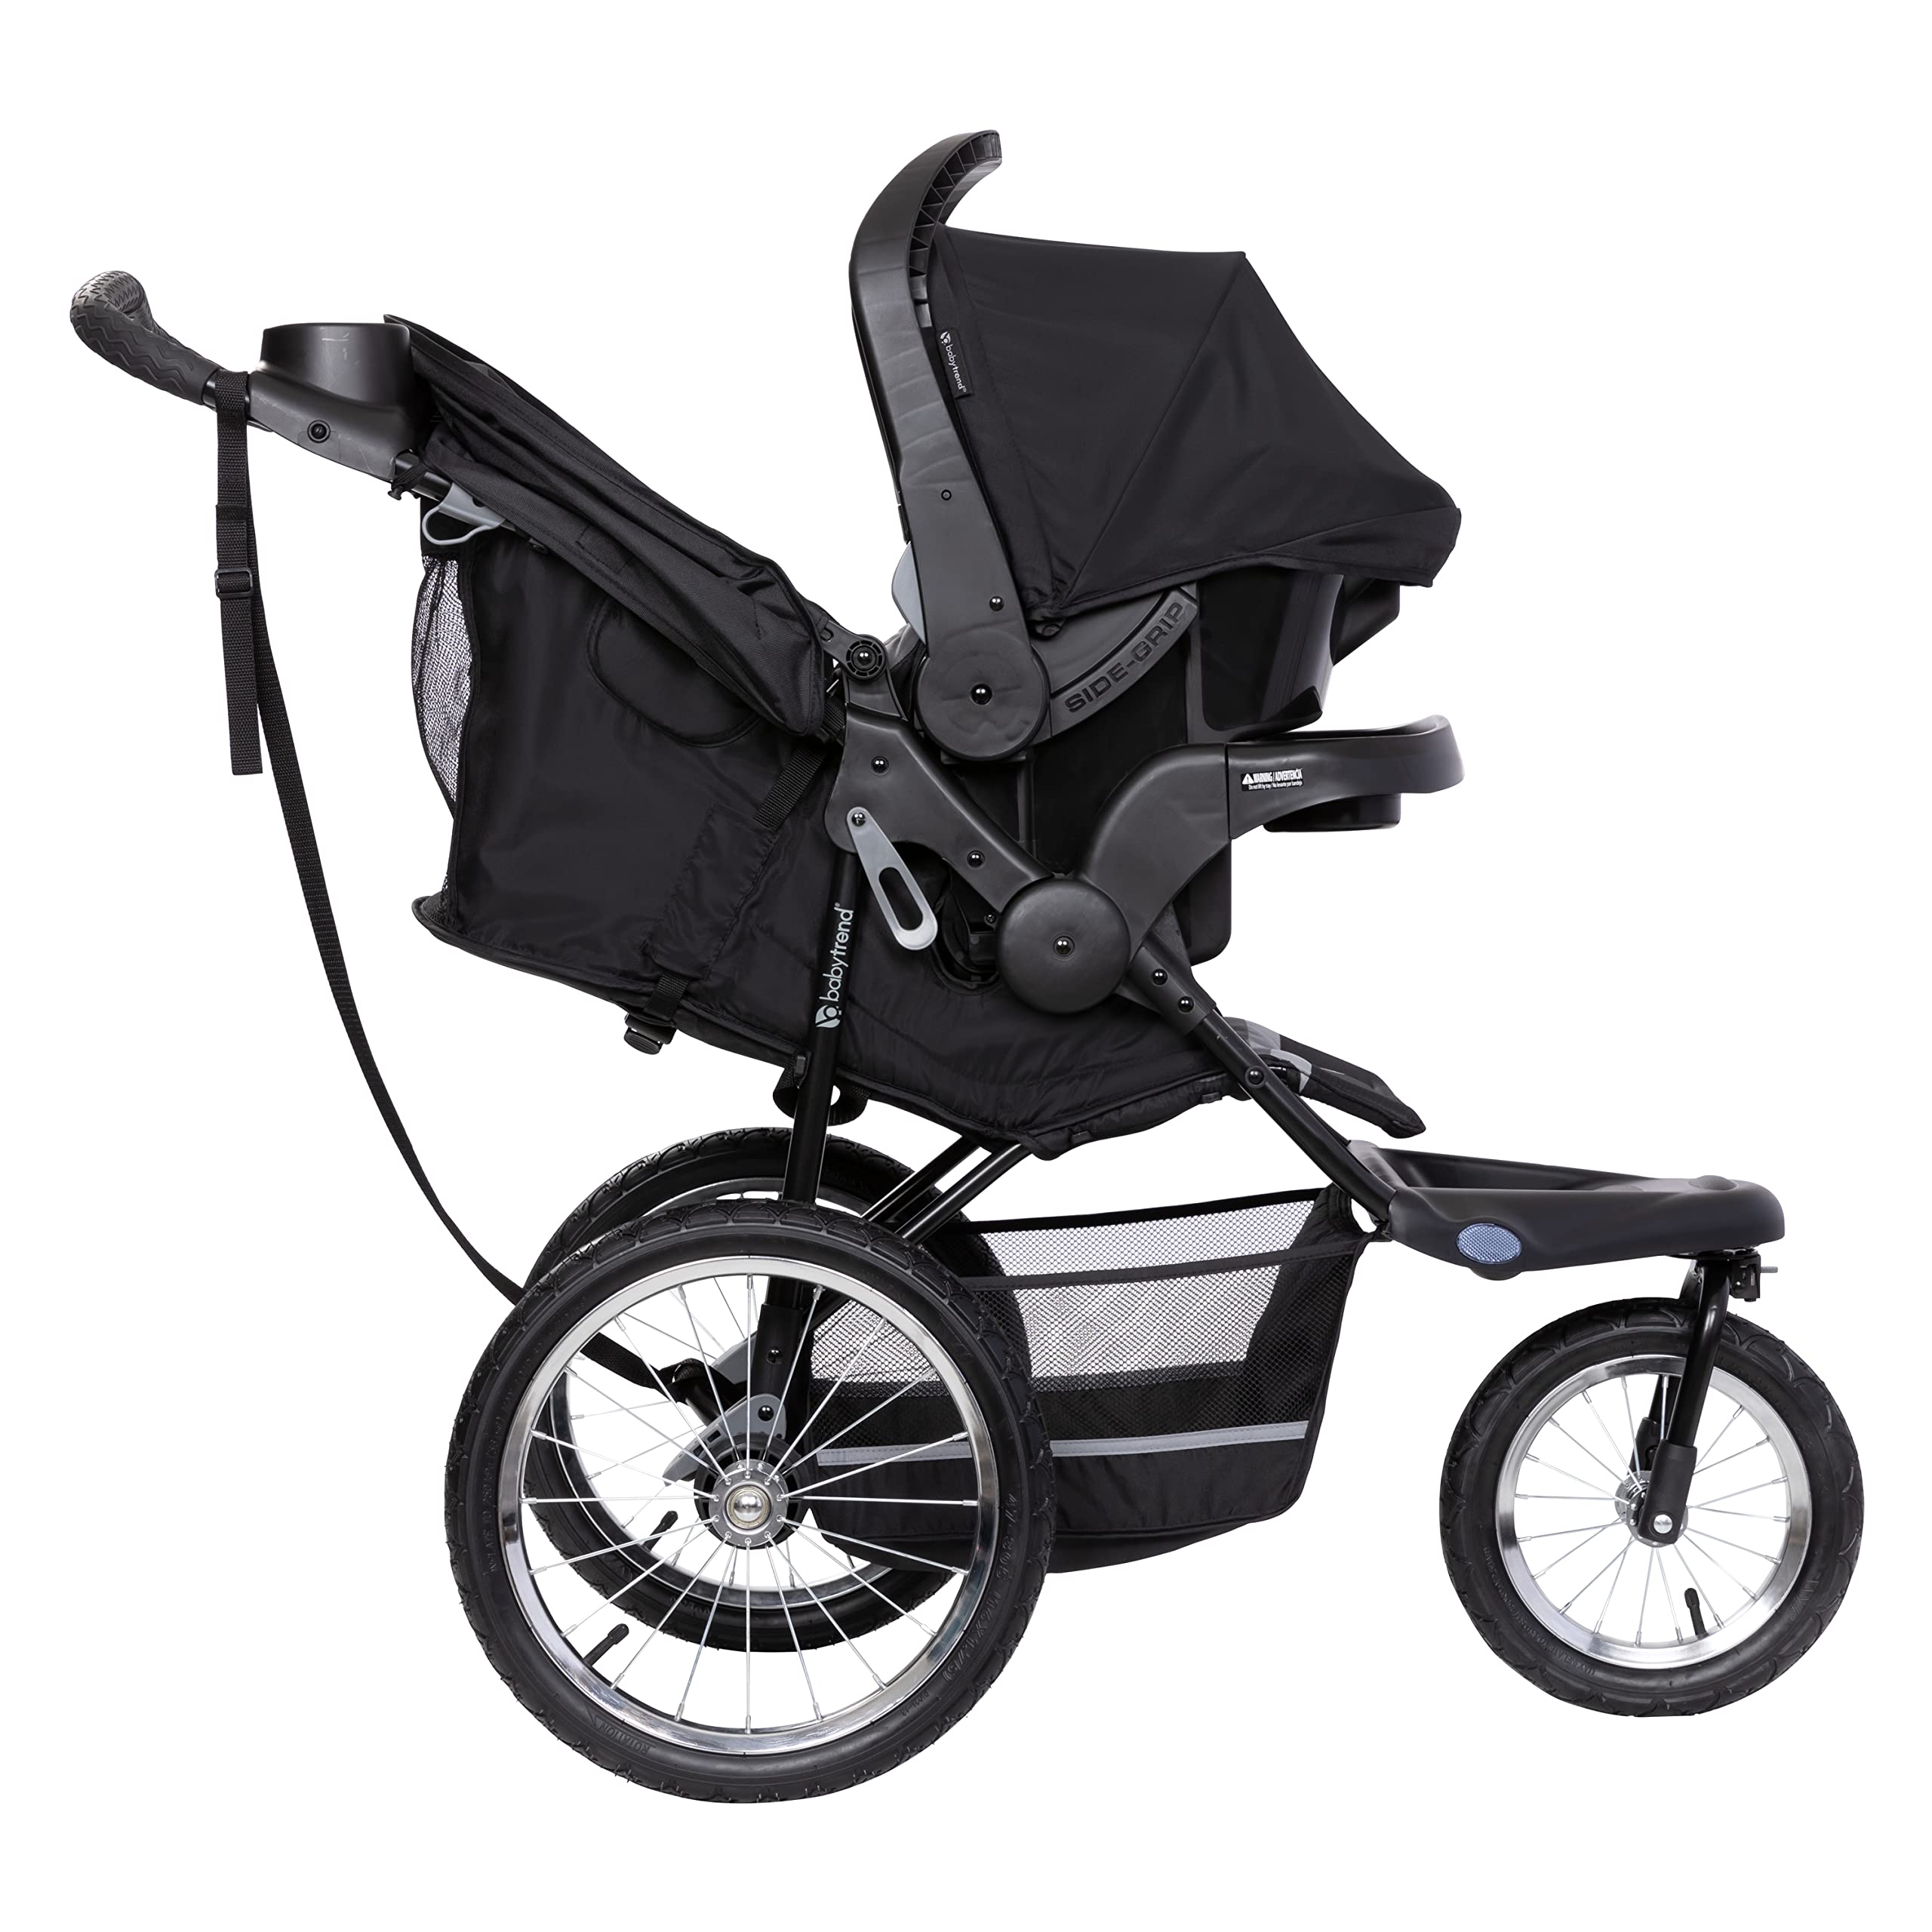 Baby Trend Expedition® Jogger Travel System with EZ-Lift Infant Car Seat